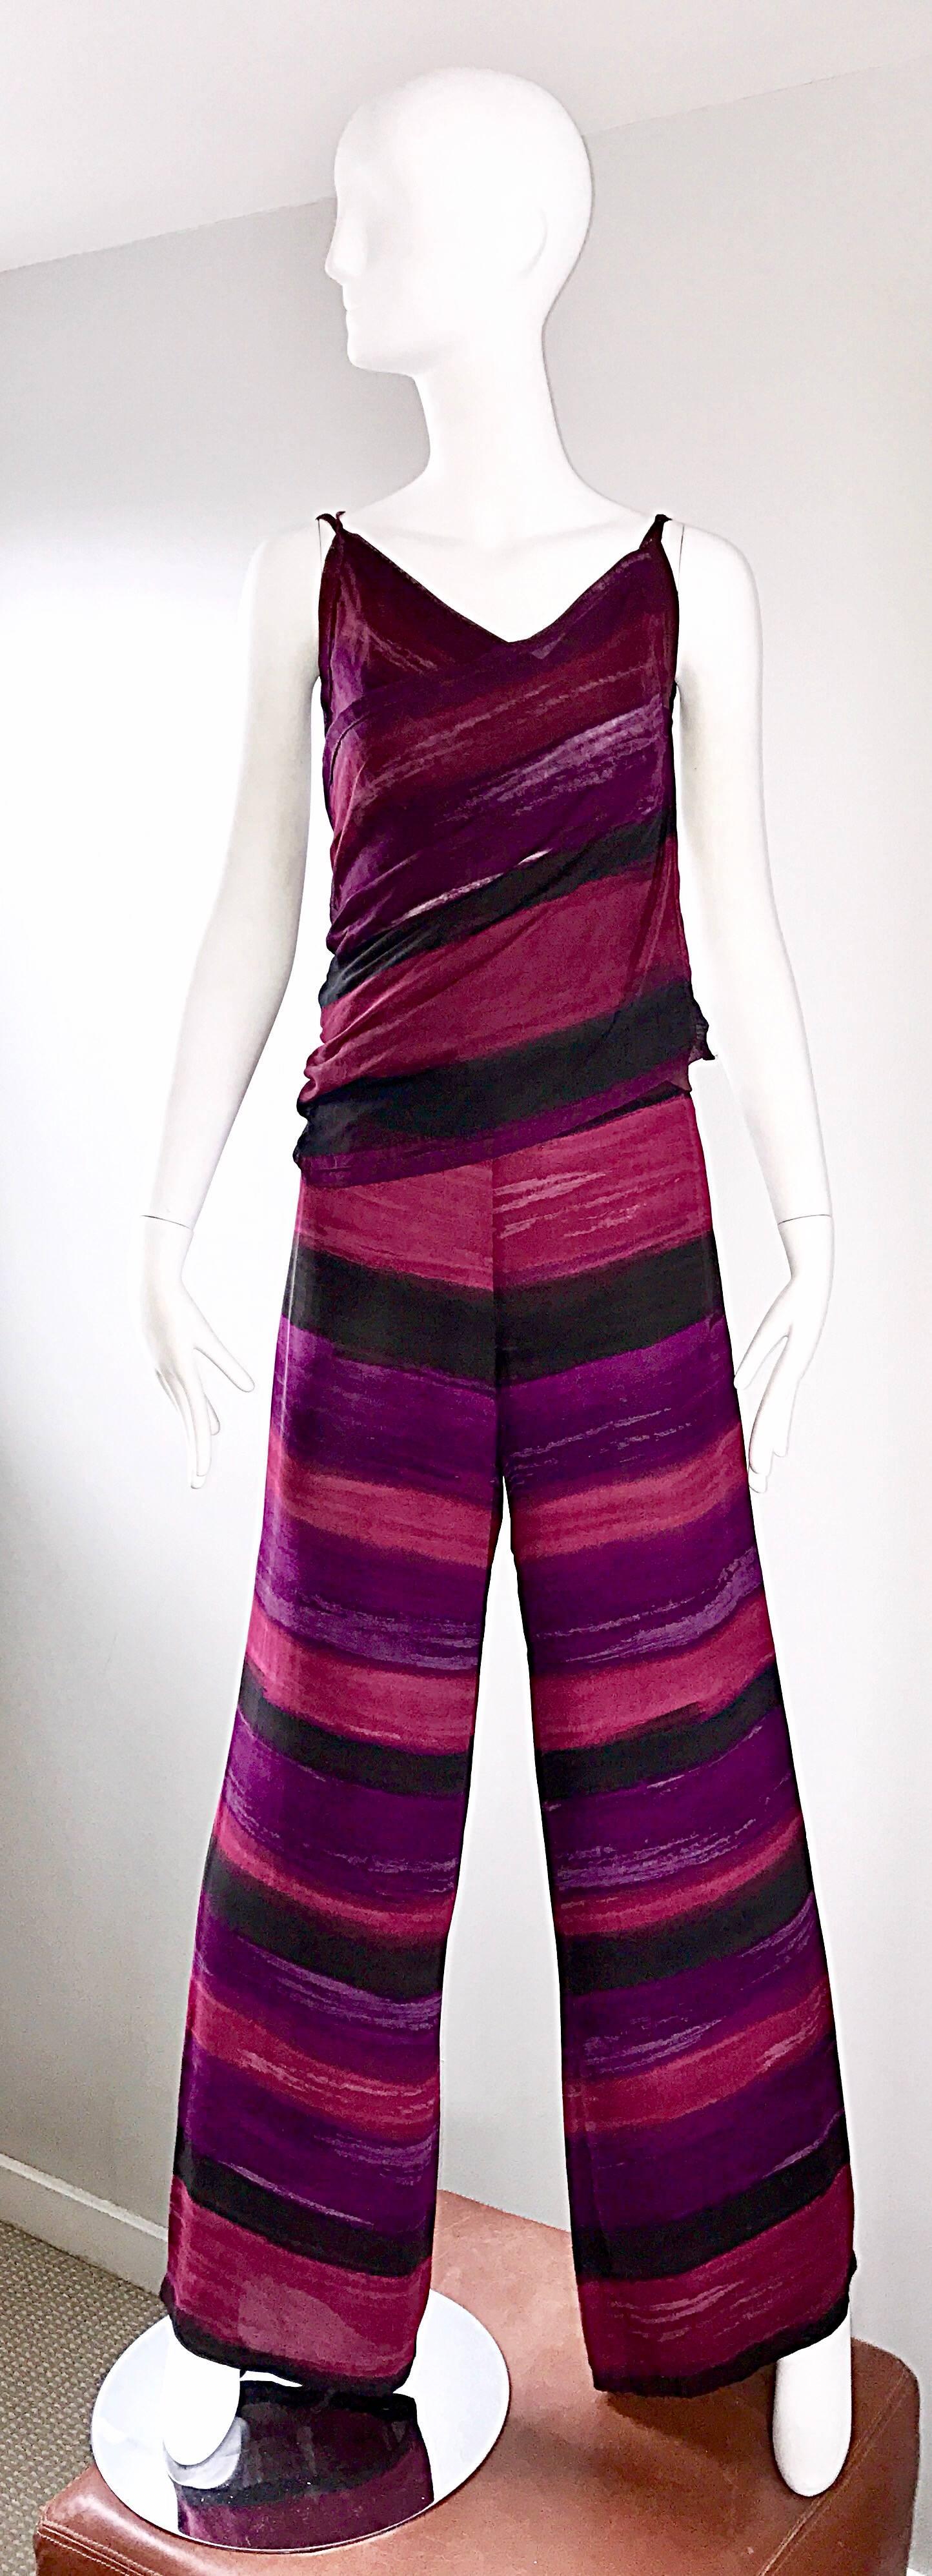 Sensational sexy vintage 90s does 1970s / 70s GIANFRANCO FERRE two piece sleeveless wrap blouse and wide leg trouser ensemble! Vibrant fuchsia pink and purple watercolor 'paintbrush' stroke stripes on an amazing soft silk jersey. Features a wrap